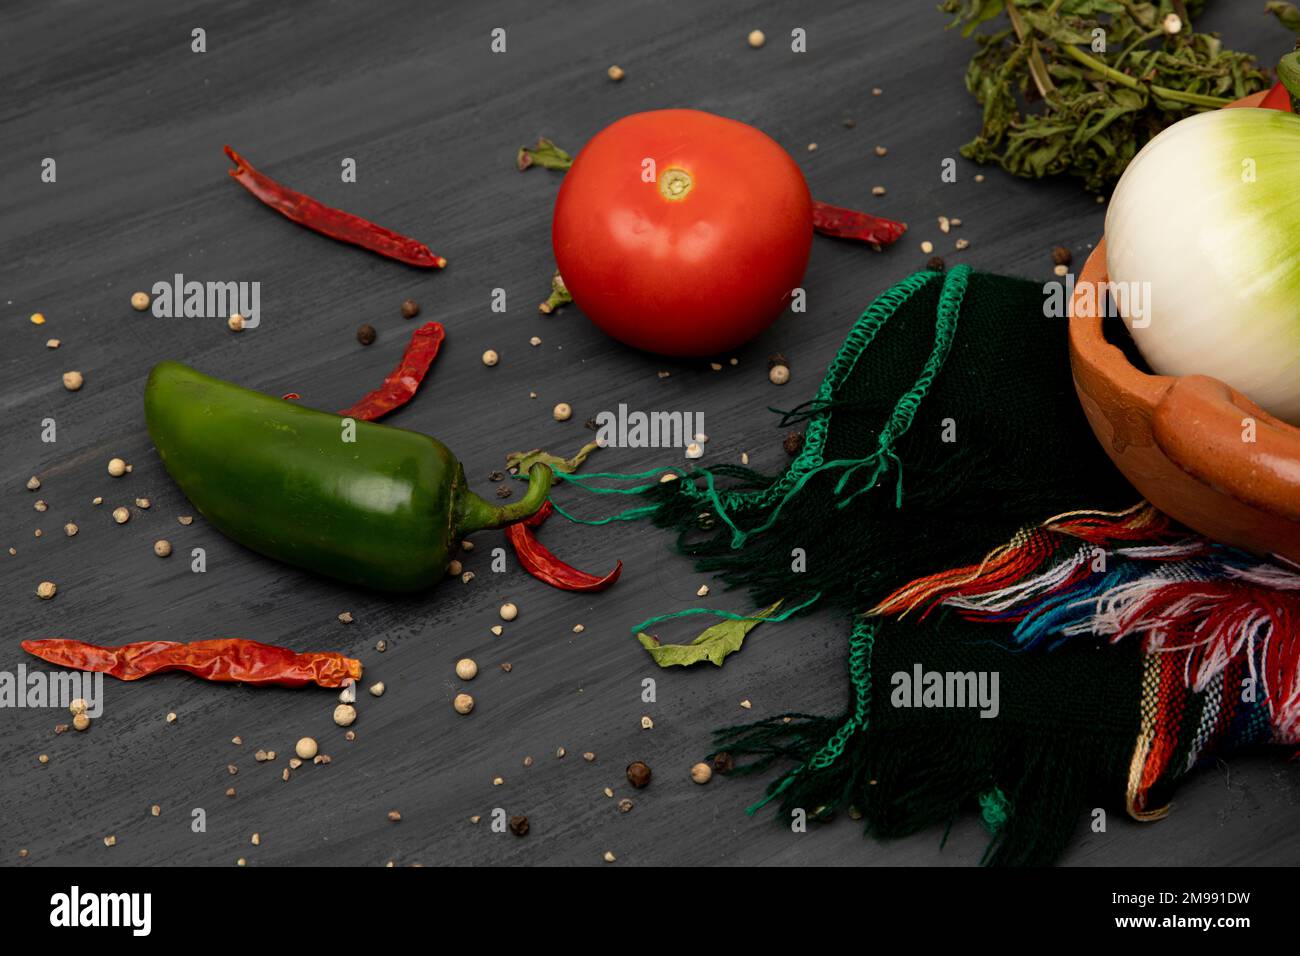 Close up of ingredients to make salsa, focusing on a tomato and a chili Stock Photo